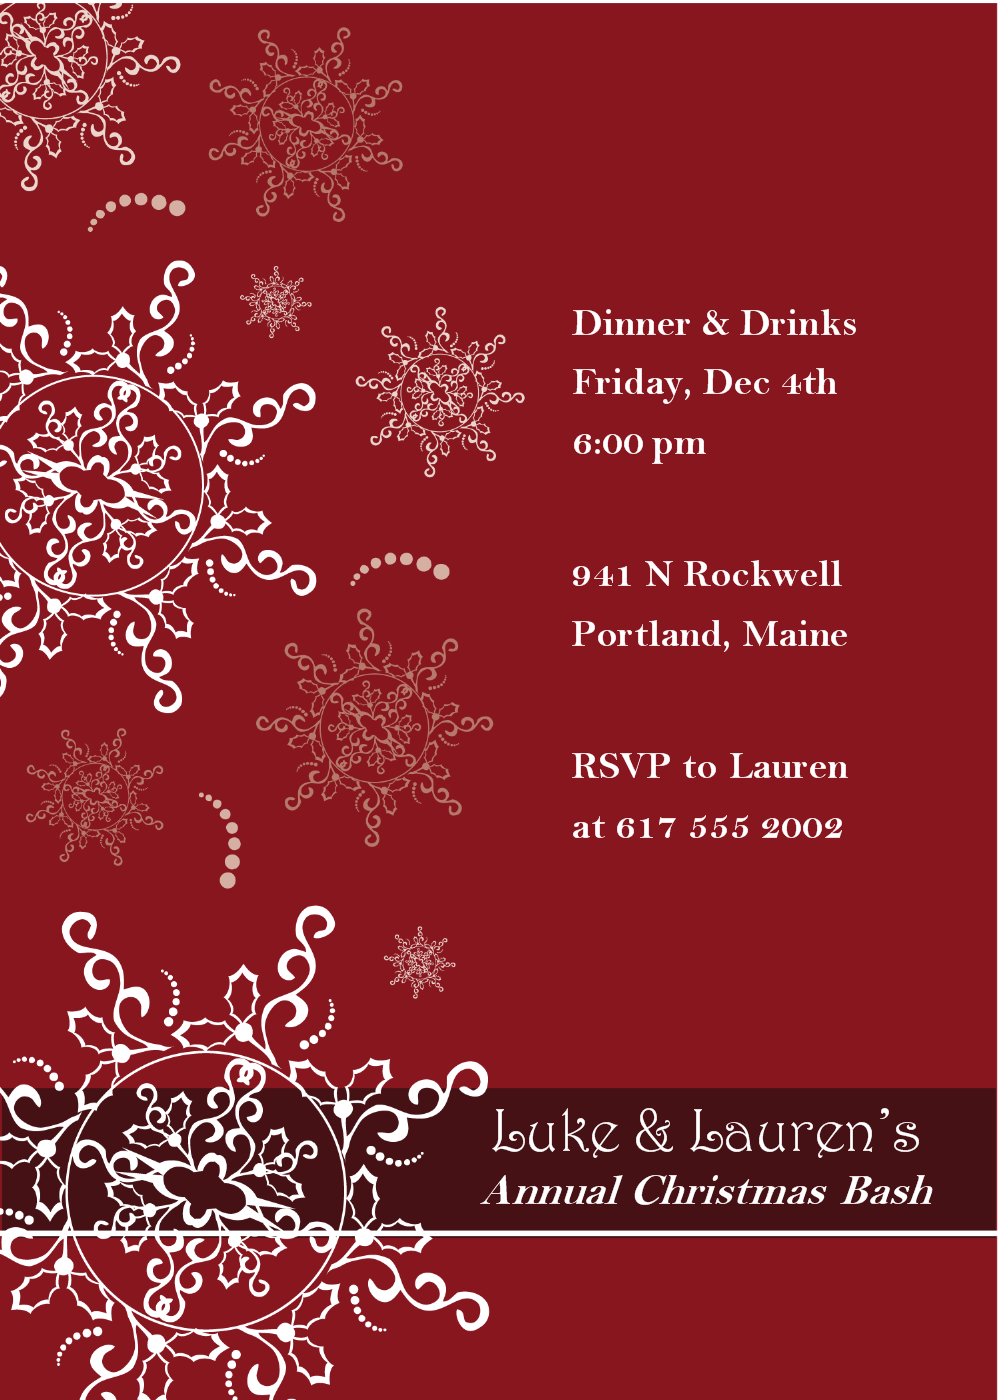 002 Free Holiday Party Invitation Templates Template Ideas Striking with dimensions 1000 X 1400